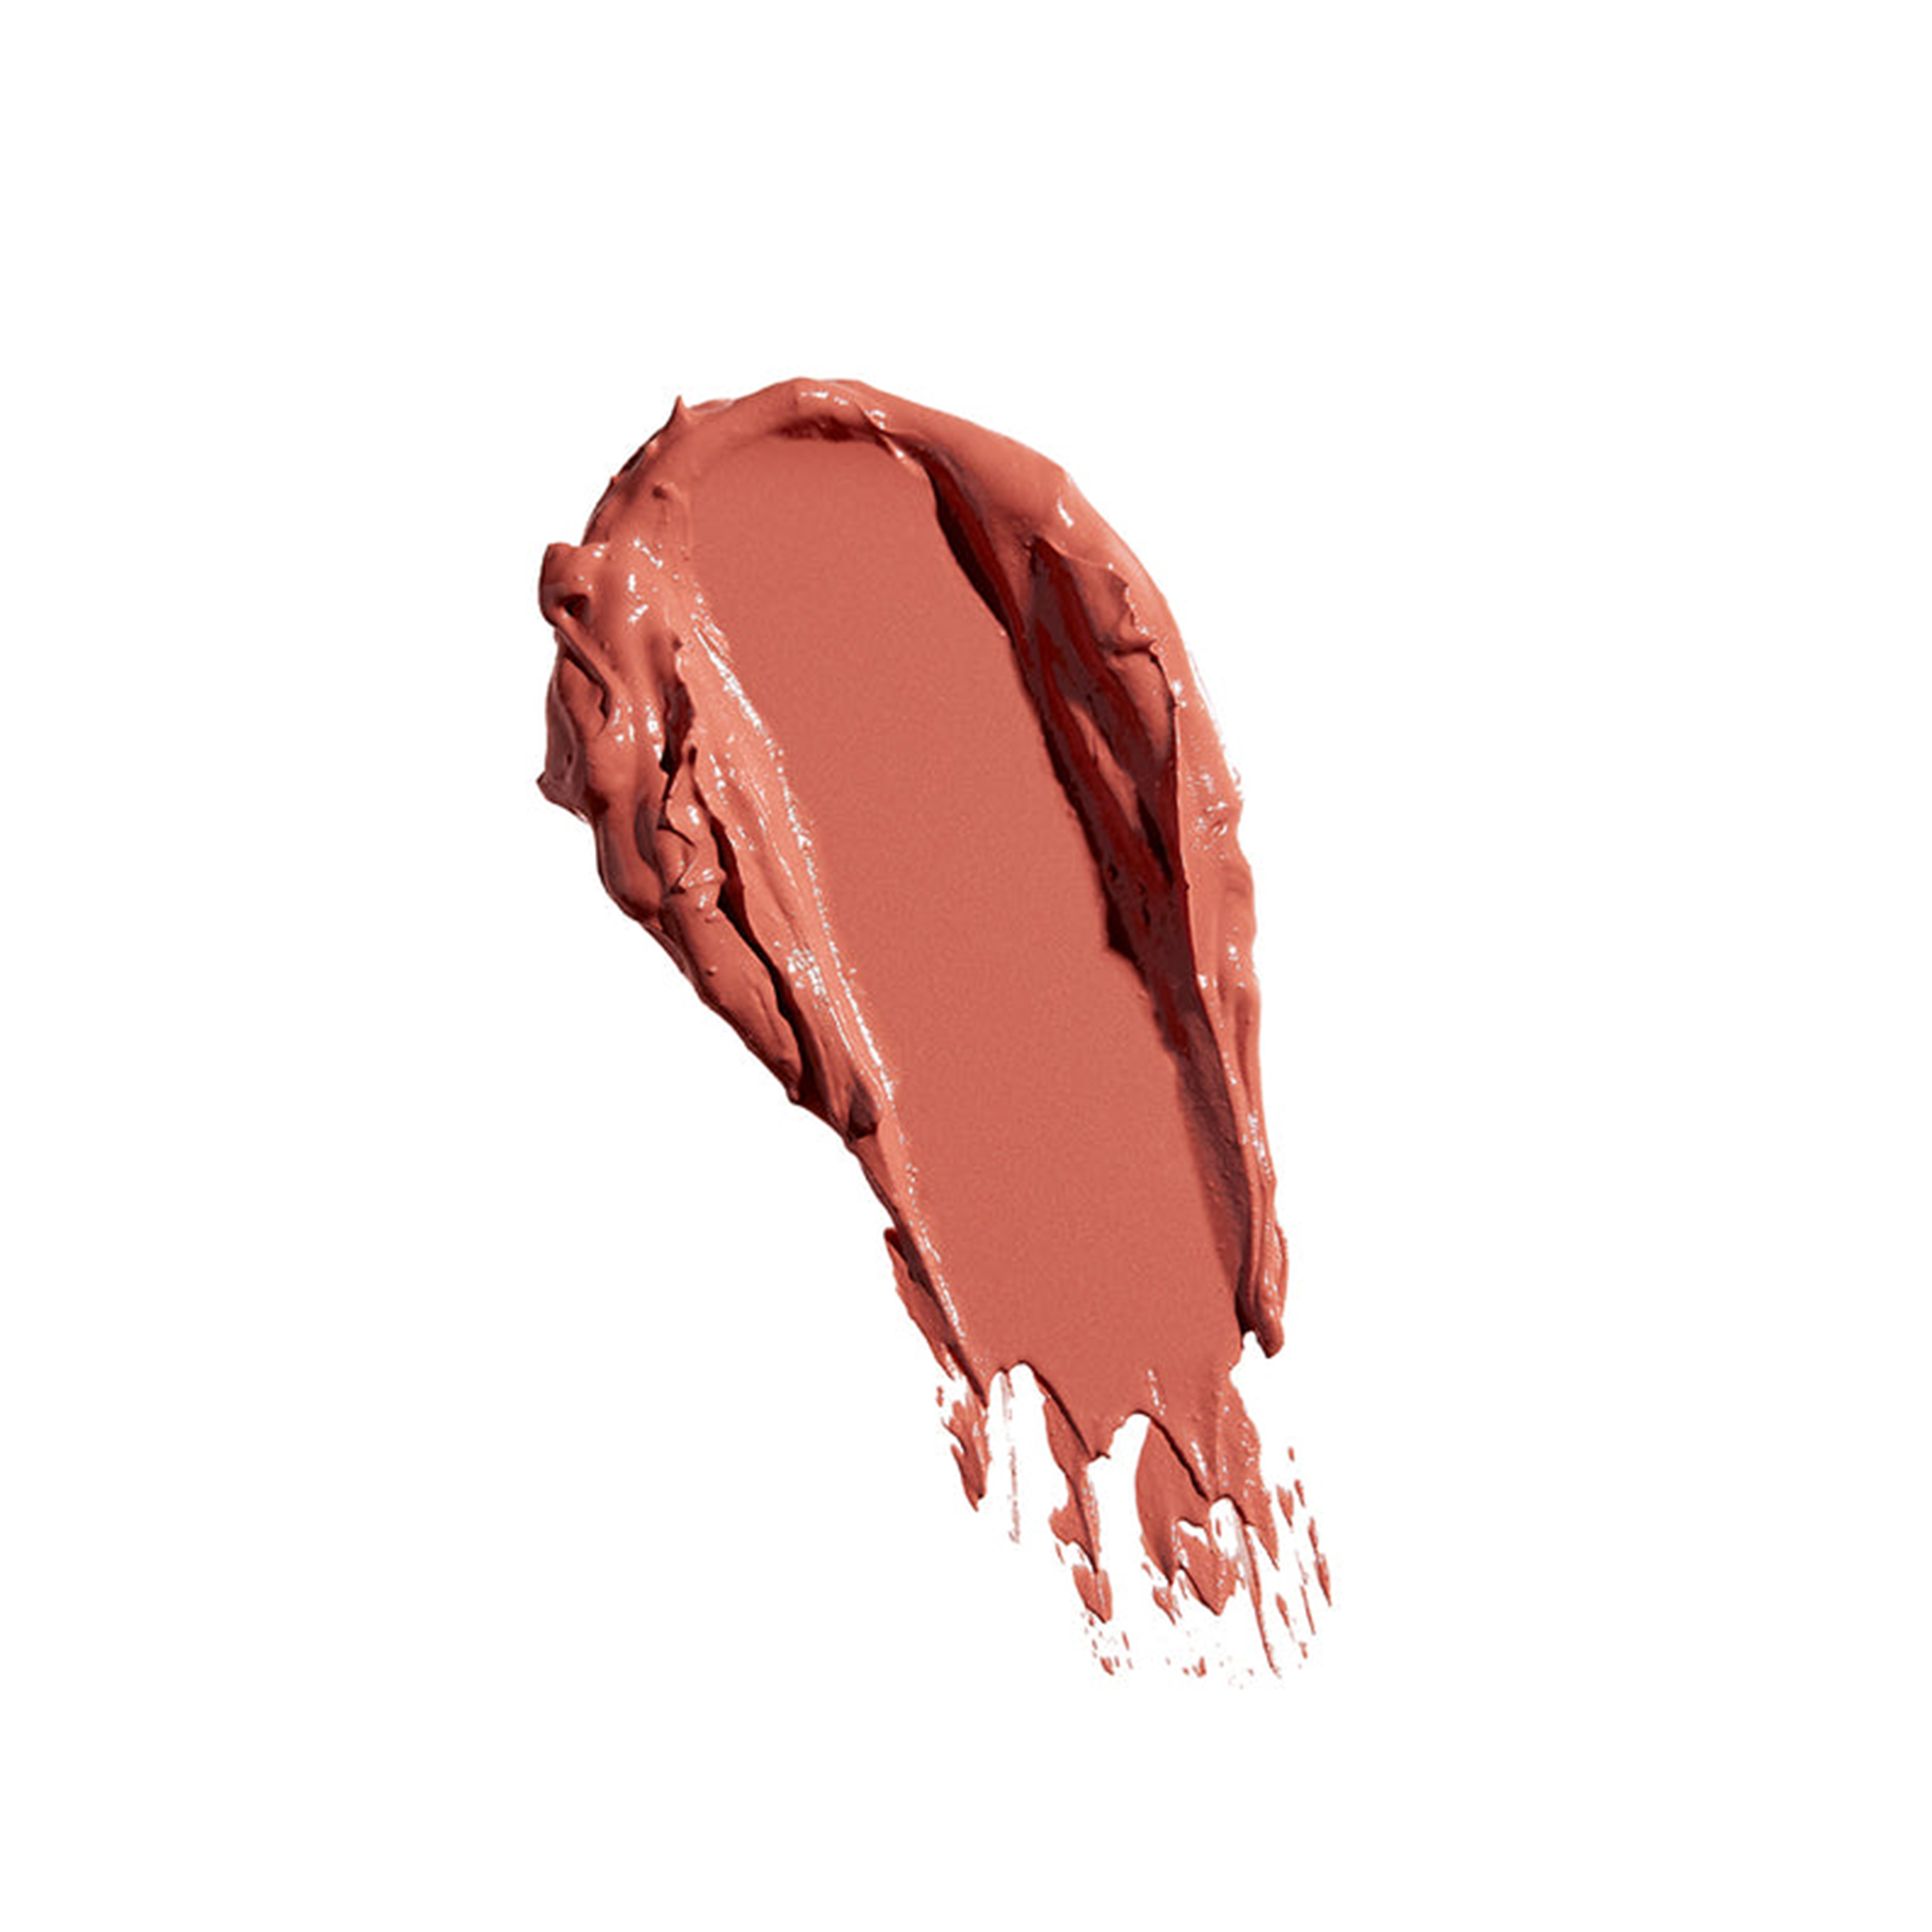 Load image into Gallery viewer, Sigma Beauty Cream Blush
